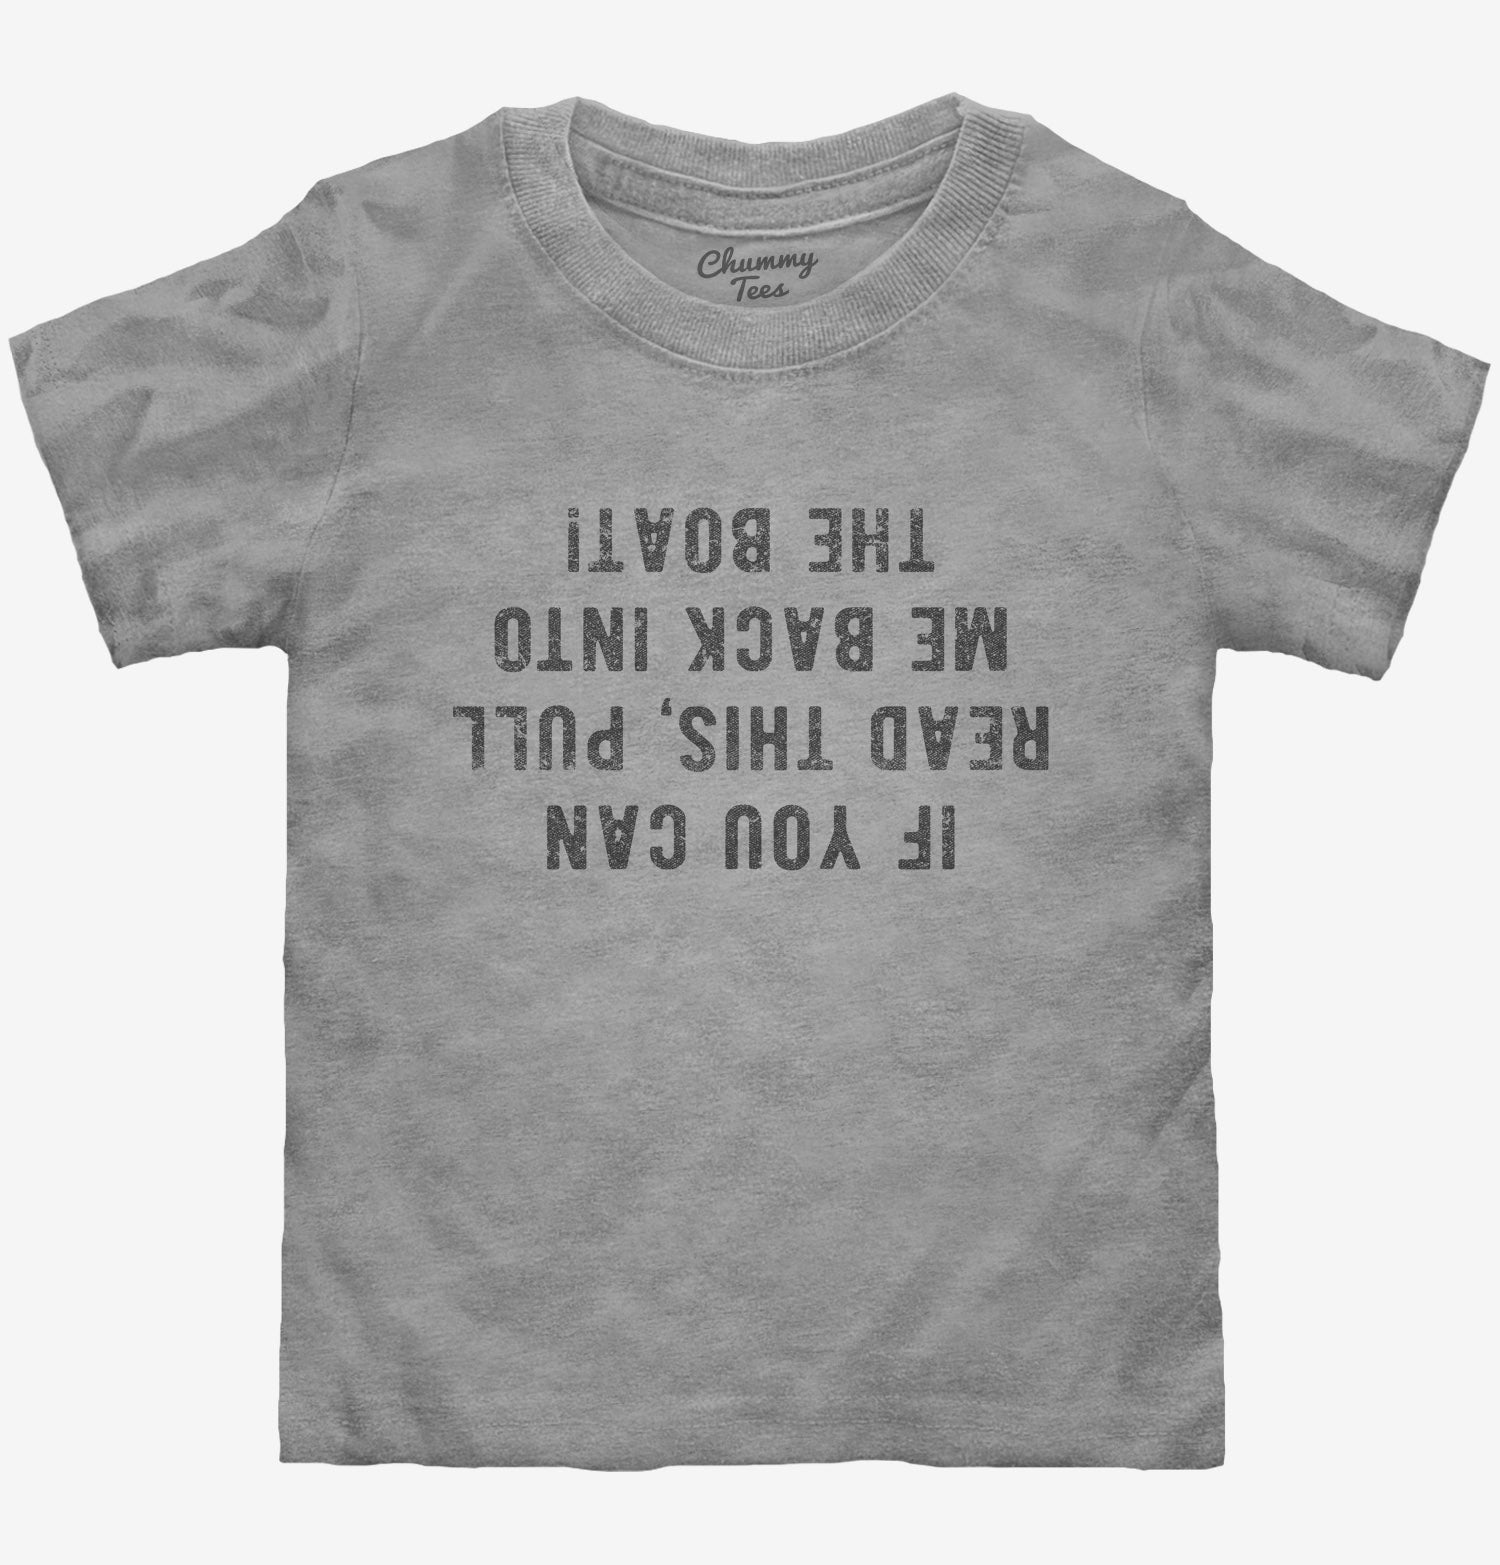 Funny Fishing Shirt If You Can Read This Pull Me Back Into The Boat T-Shirt